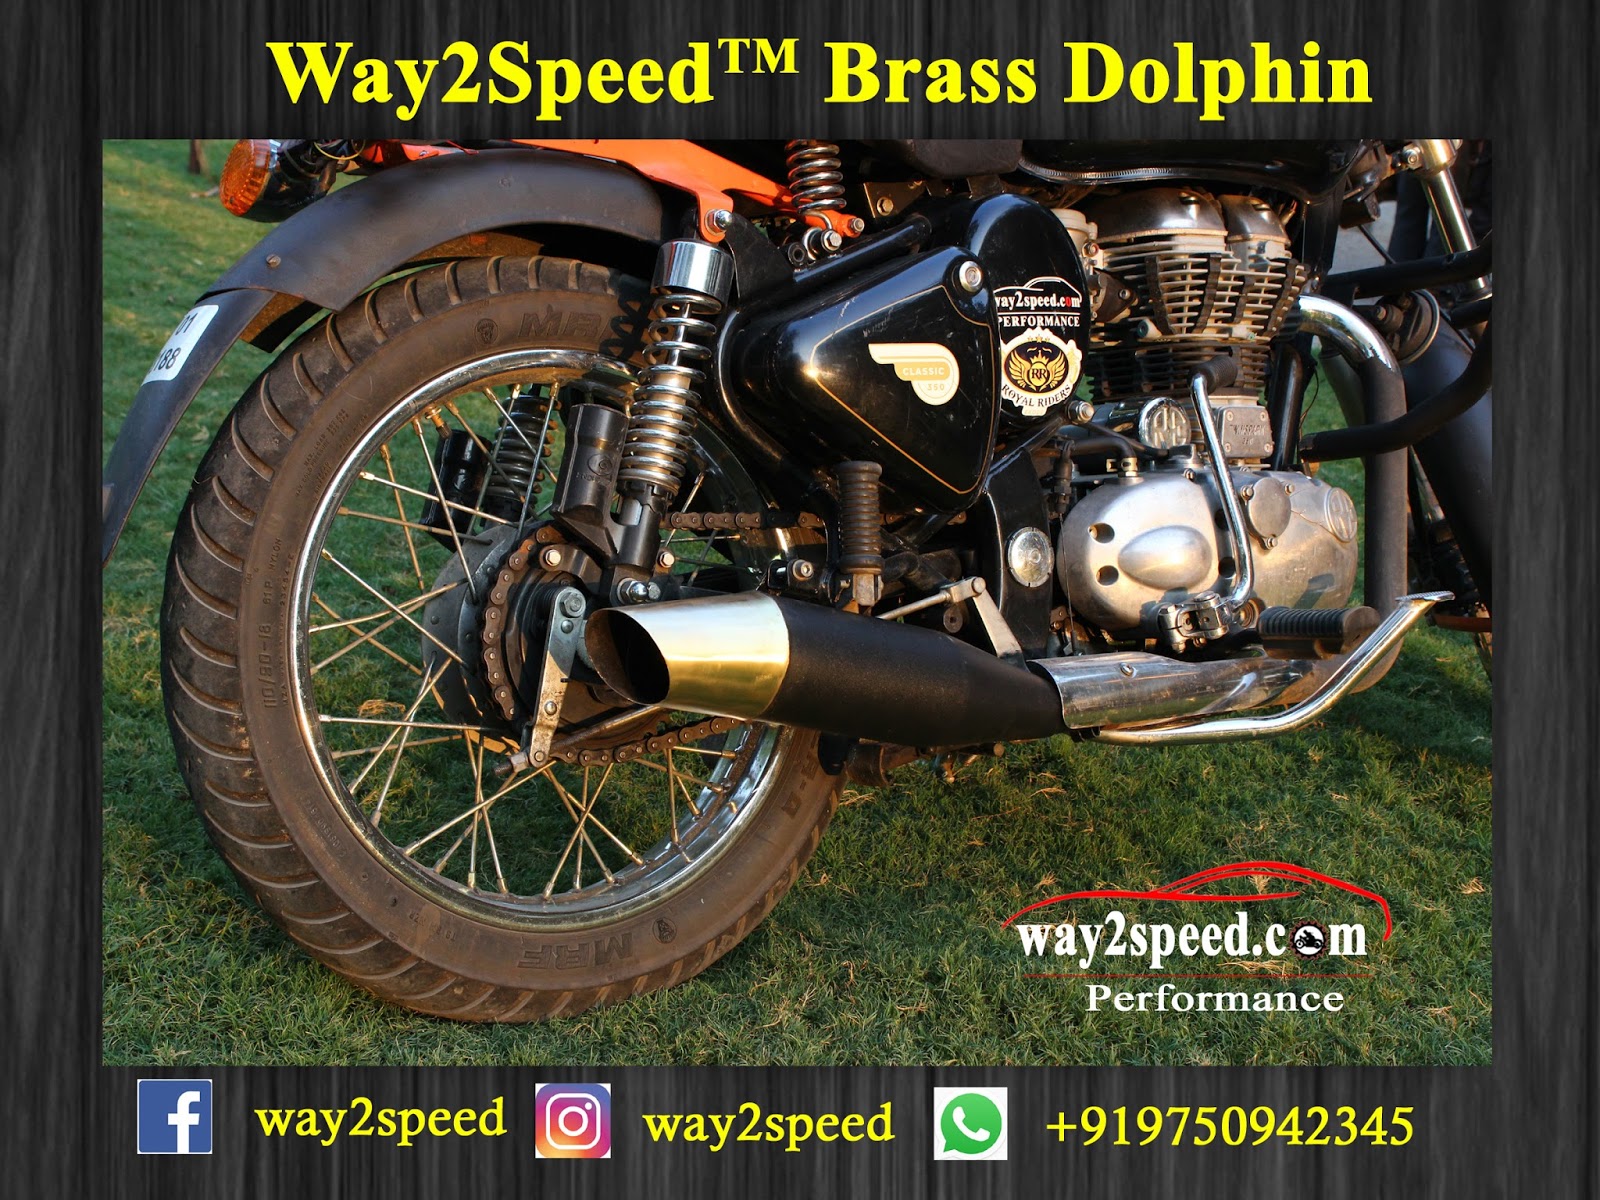 Royal Enfield Dolphin Silencer (brass) | way2speed Performance | royal enfield Silencer | royal enfield Exhaust | royal enfield classic 350 silencer sound | royal enfield glass wool silencer | Silencer for classic 350 | Best silencer for royal enfield | Bullet silencer sound increase  Royal Enfield Dolphin Silencer (brass) is a direct fit for Royal Enfield Bullet 350, Royal Enfield Classic 350, Royal Enfield Thunderbird 350, Royal Enfield Bullet 500, Royal Enfield Classic 500, Royal Enfield Thunderbird 500, Royal Enfield Continental GT